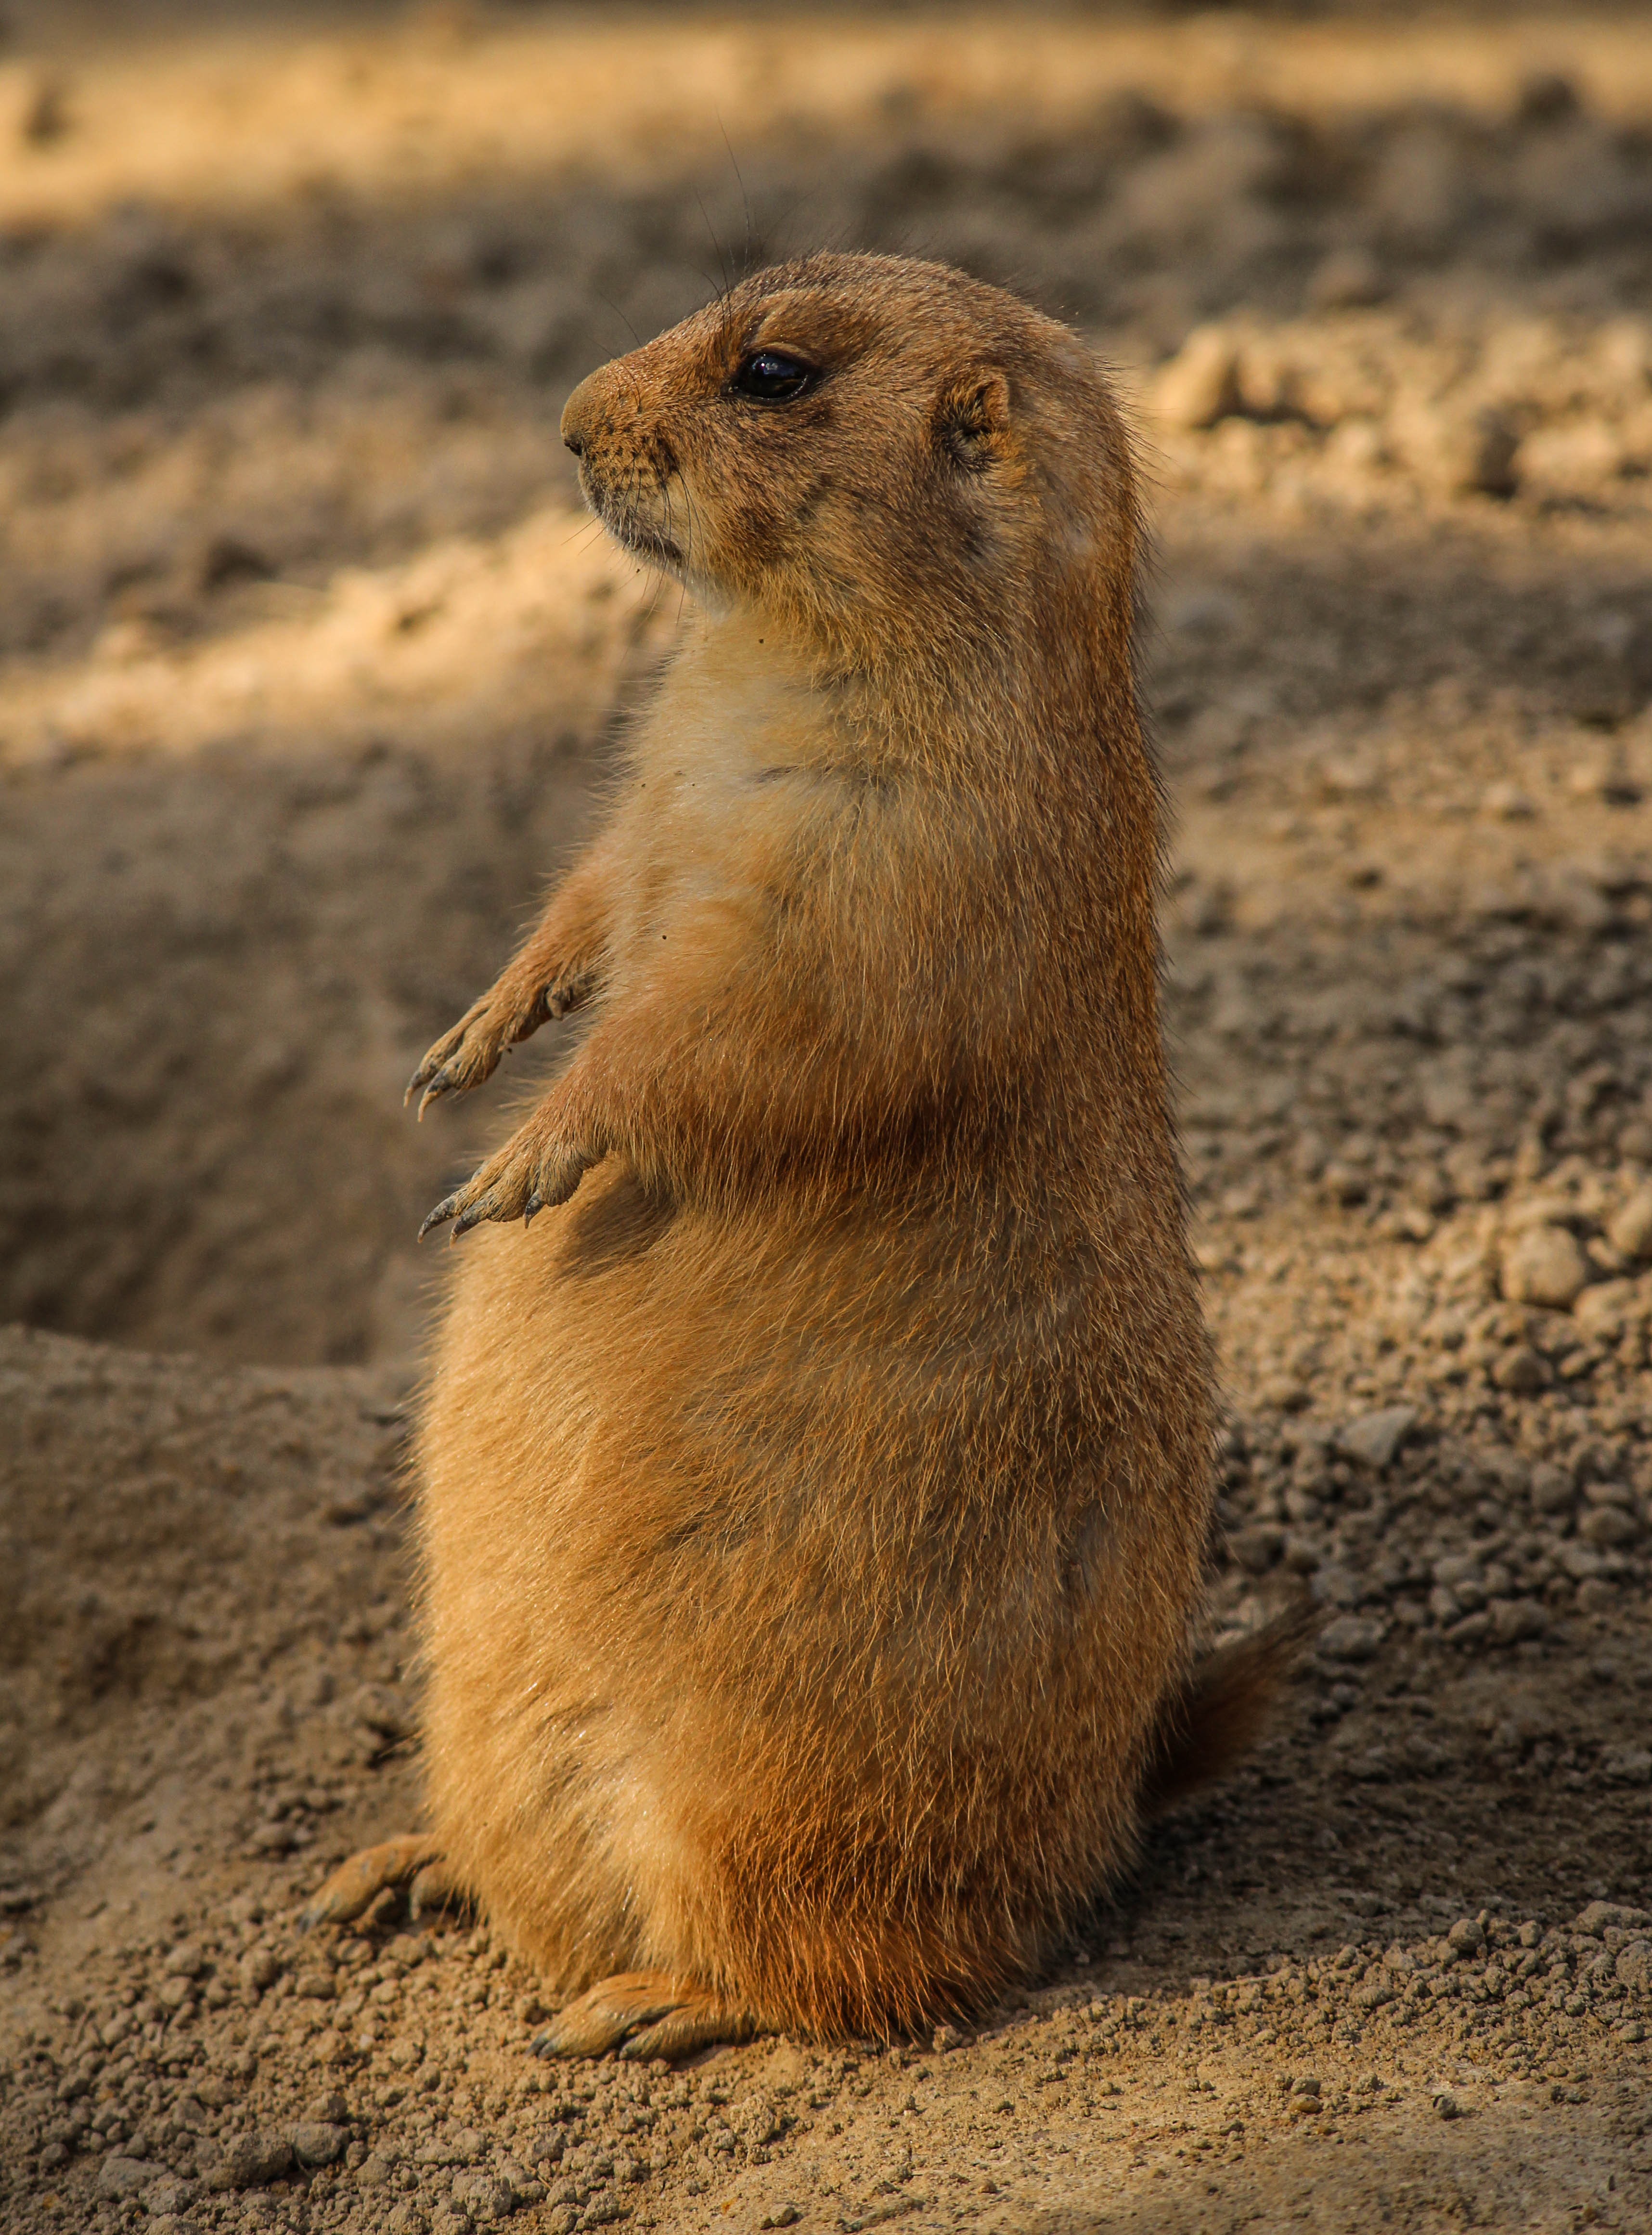 Wallpapers zoology animals prairie dog on the desktop